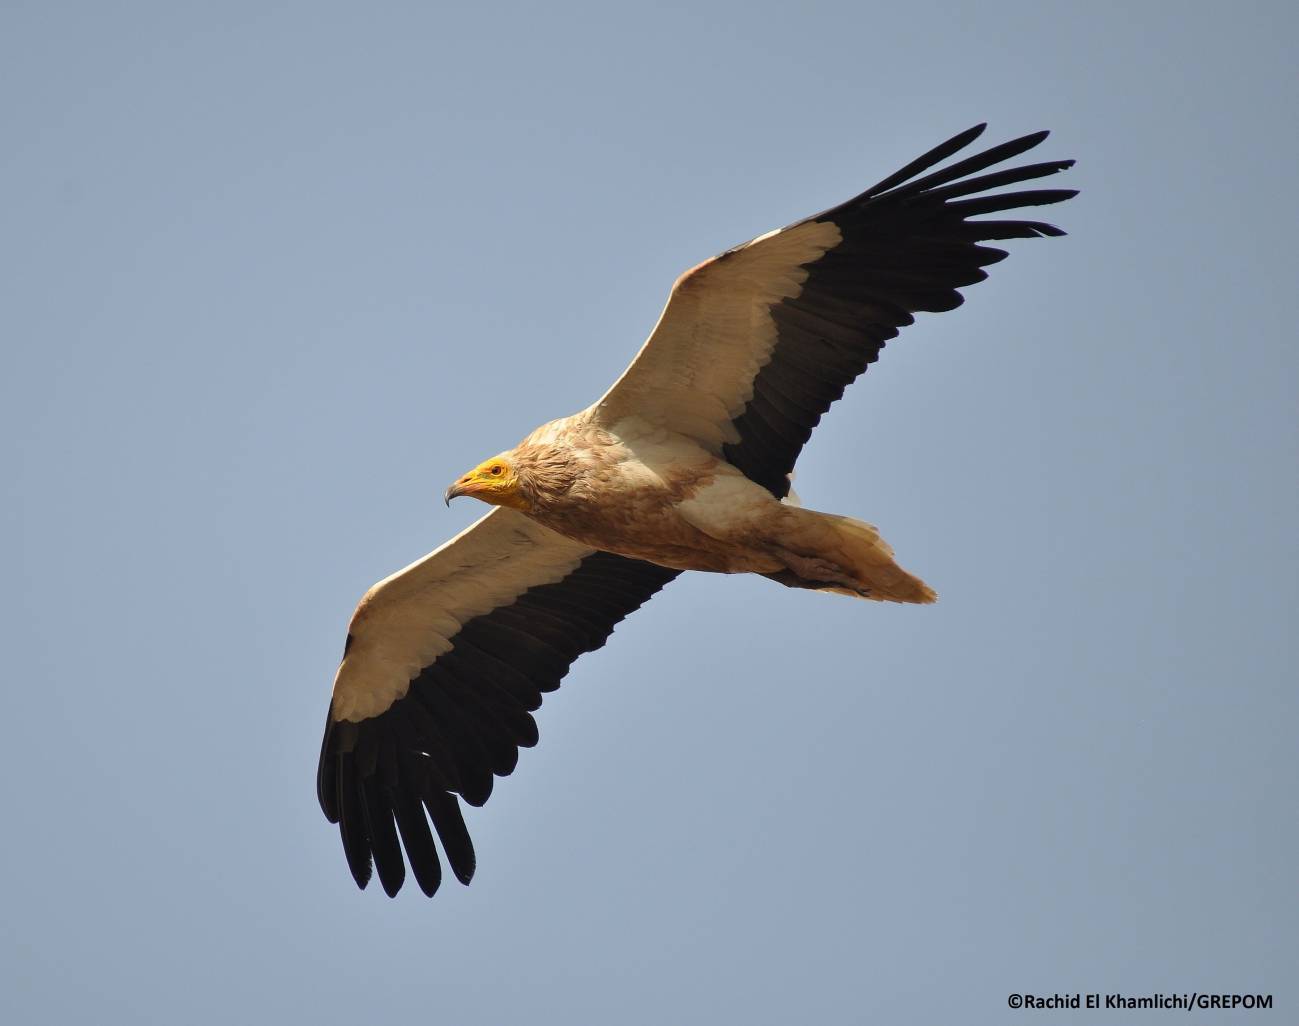 Half of the birds of prey that breed in North Africa are in danger of extinction